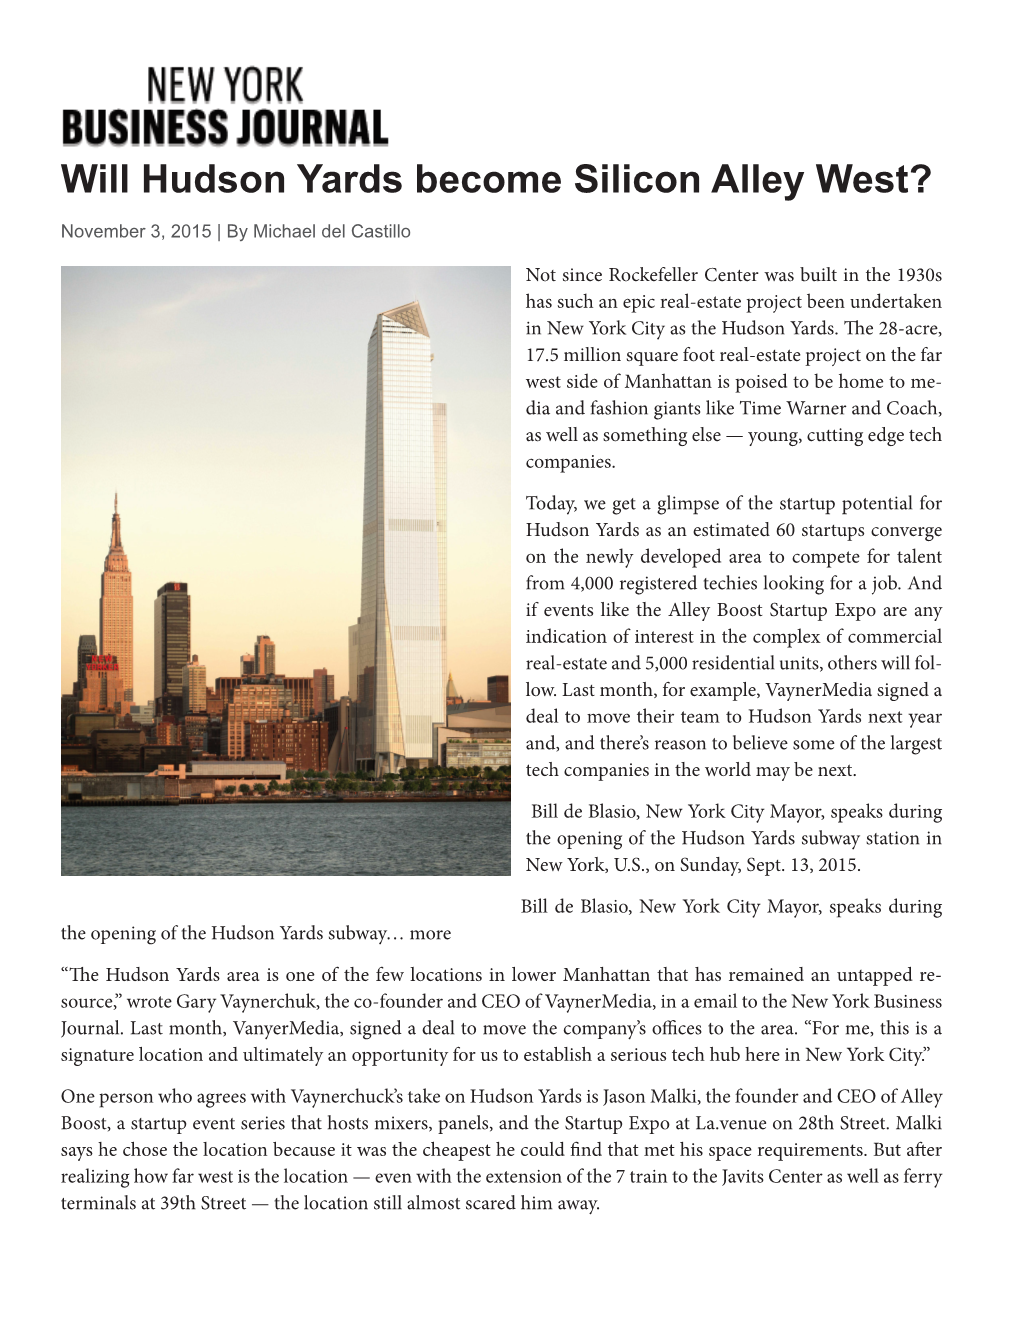 Will Hudson Yards Become Silicon Alley West? November 3, 2015 | by Michael Del Castillo